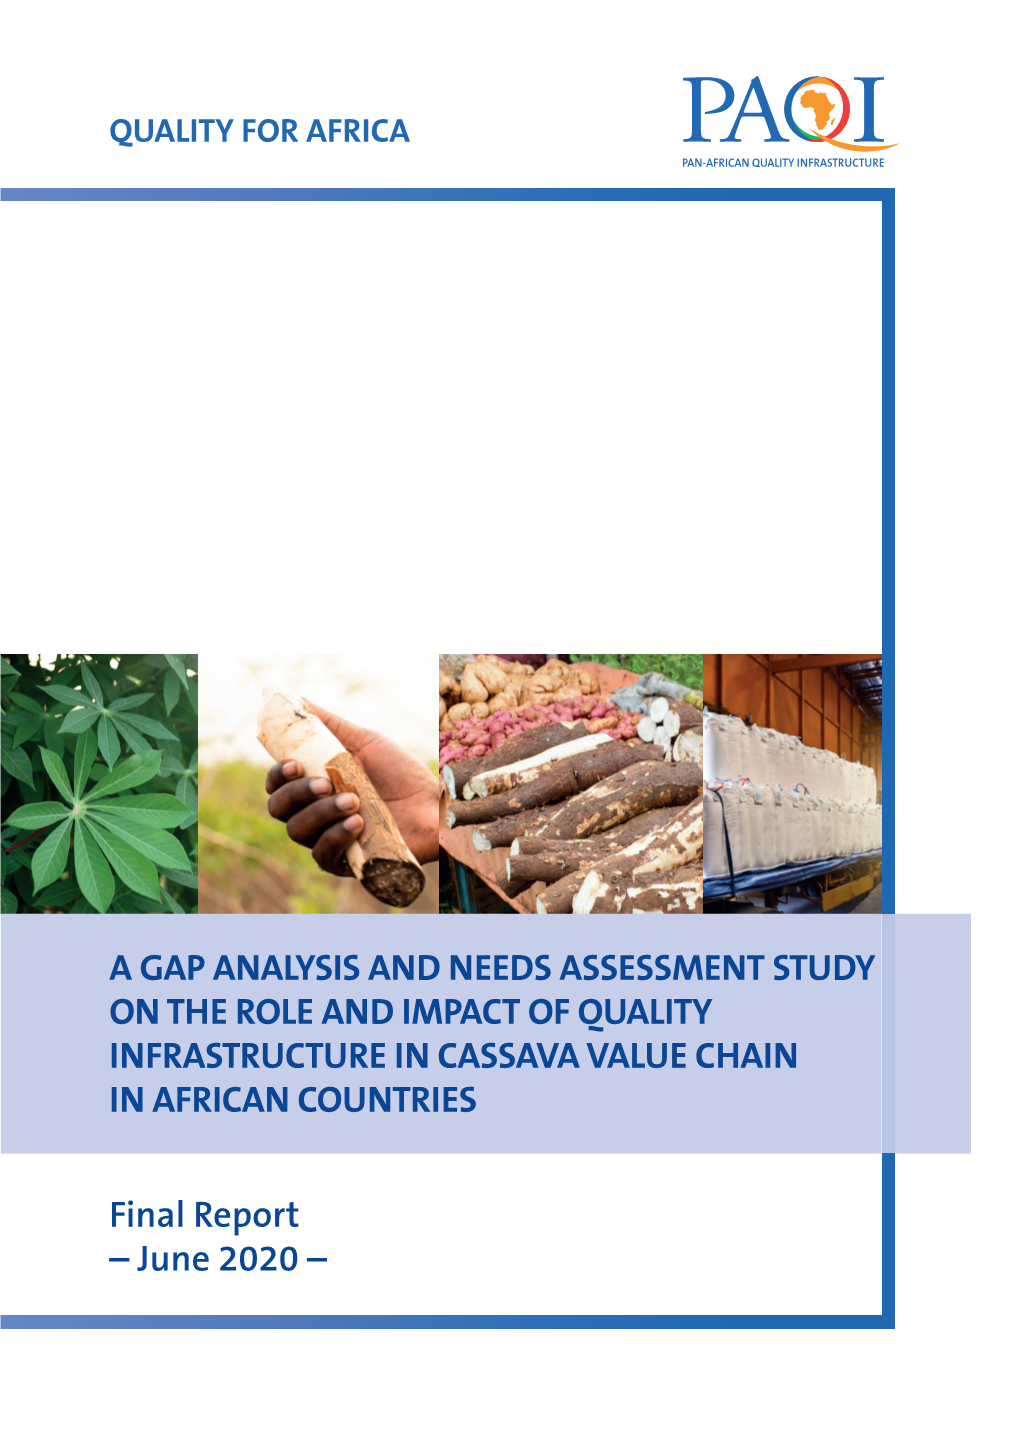 A Gap Analysis and Needs Assessment Study on the Role and Impact of Quality Infrastructure in Cassava Value Chain in African Countries